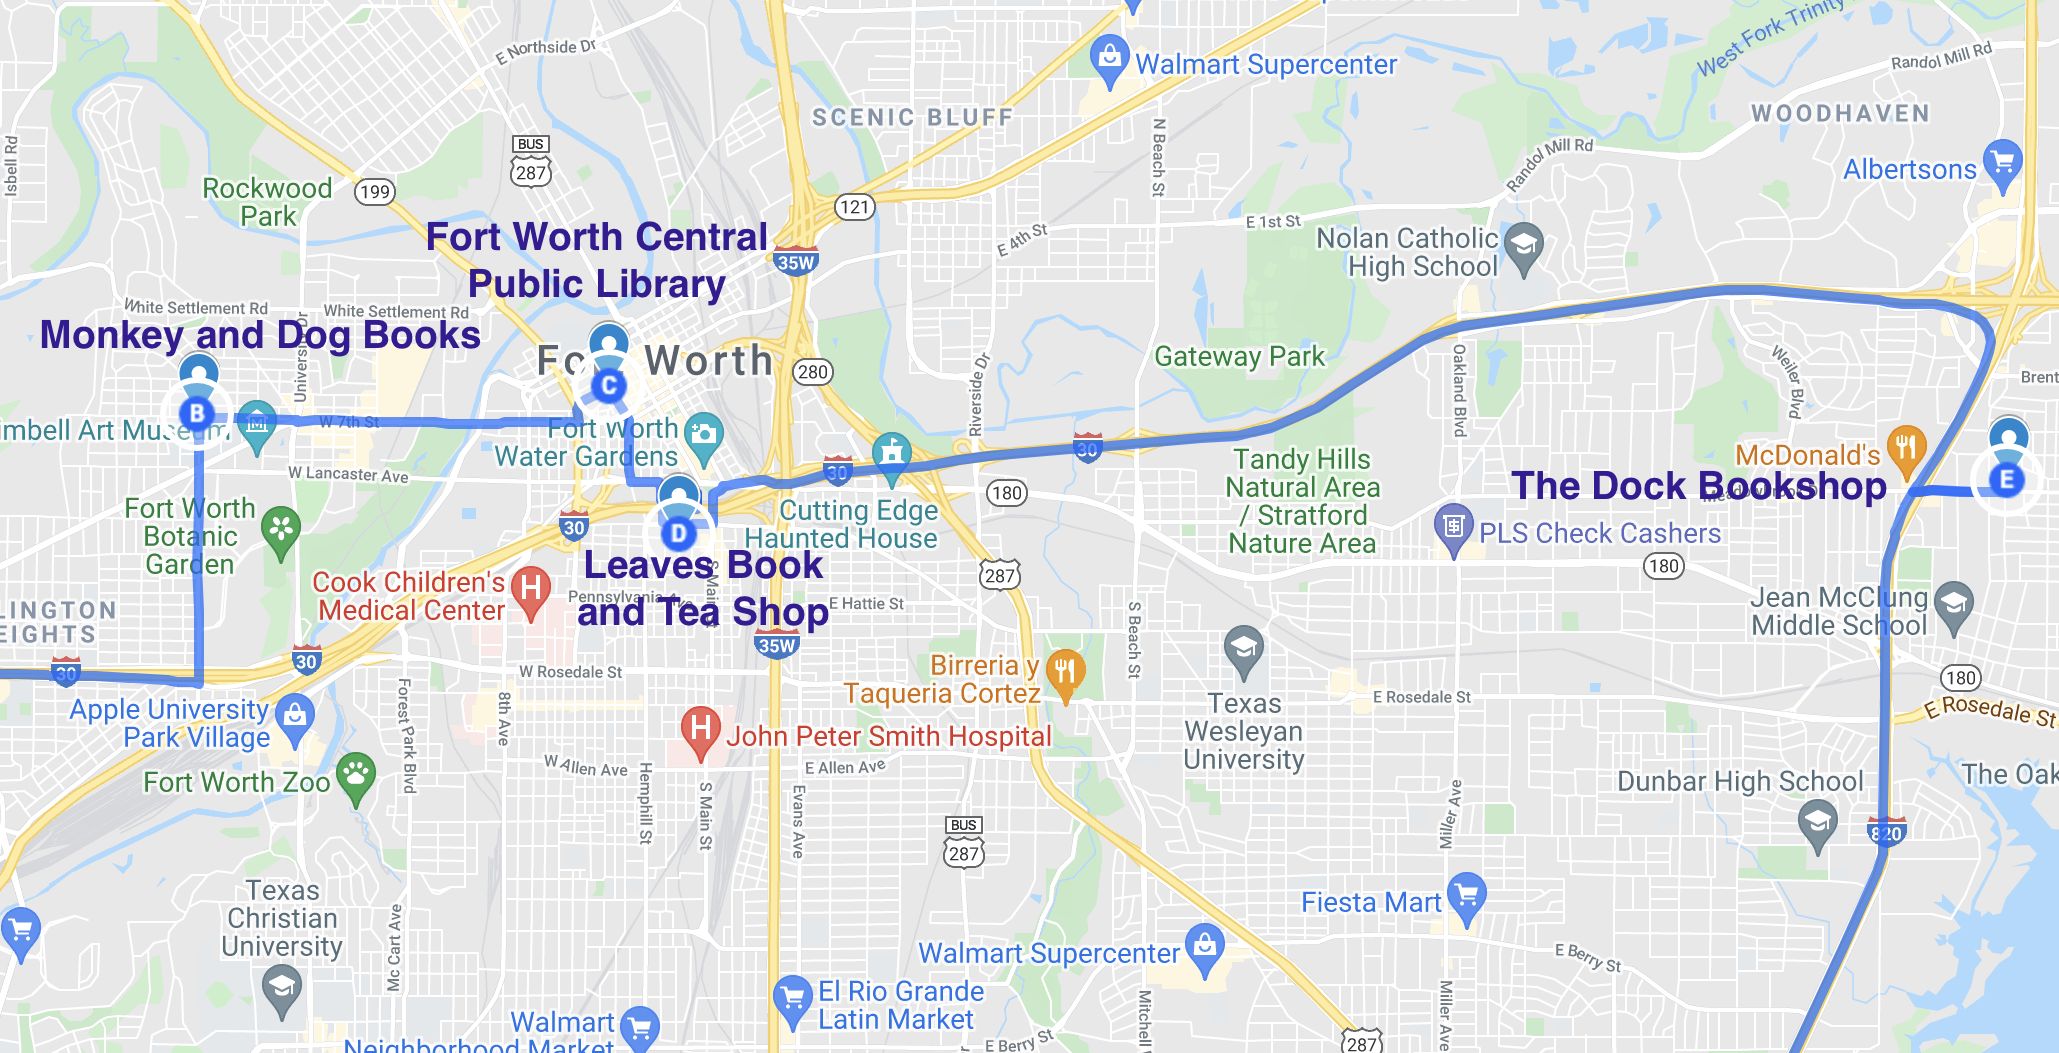 map of literary spots in fort worth texas